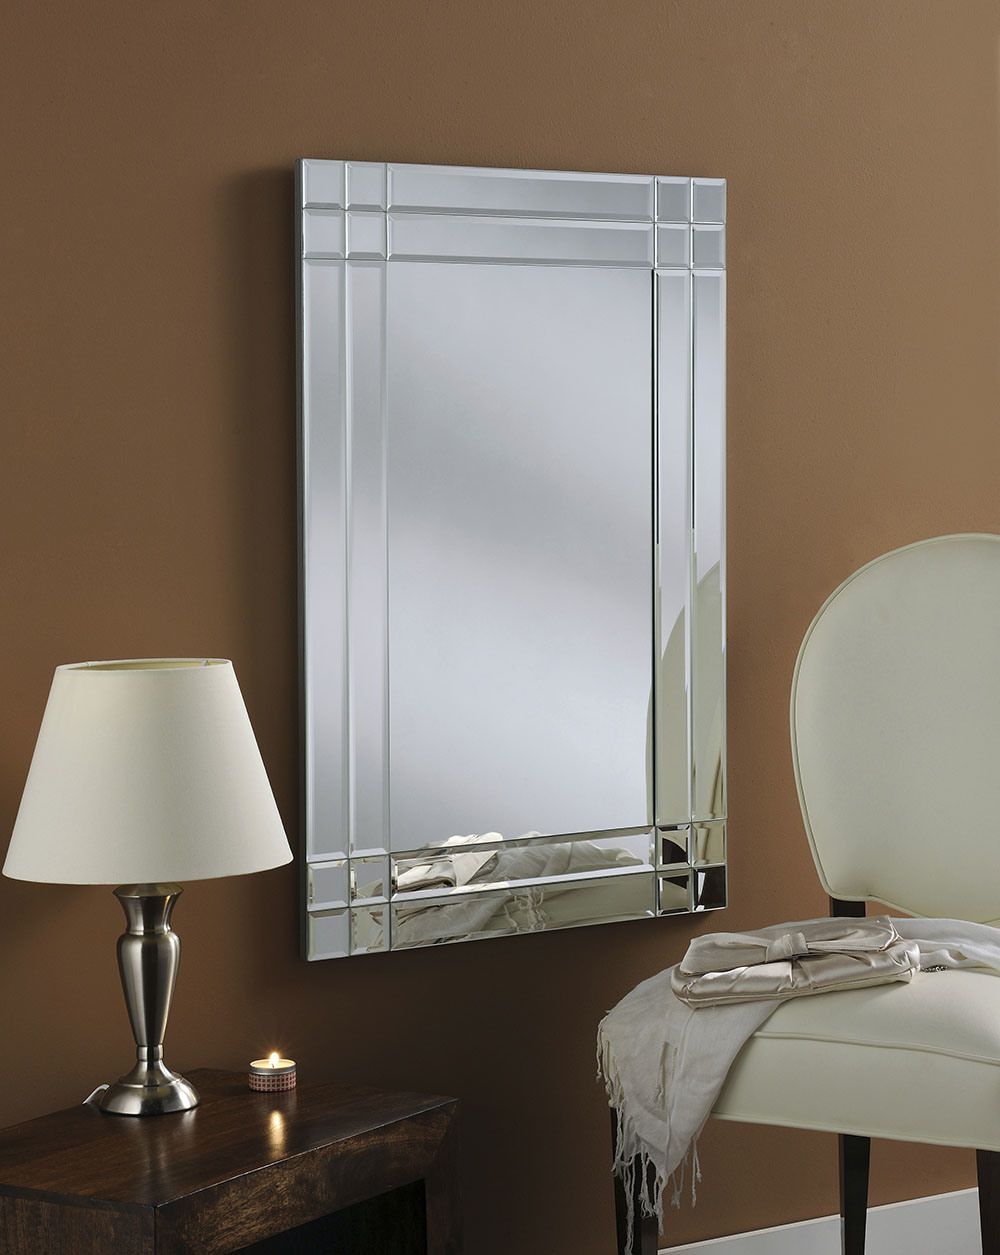 China Vanity Sheffield Home Decorative Modern Wall Mirror – China Intended For Loftis Modern & Contemporary Accent Wall Mirrors (Photo 4 of 15)